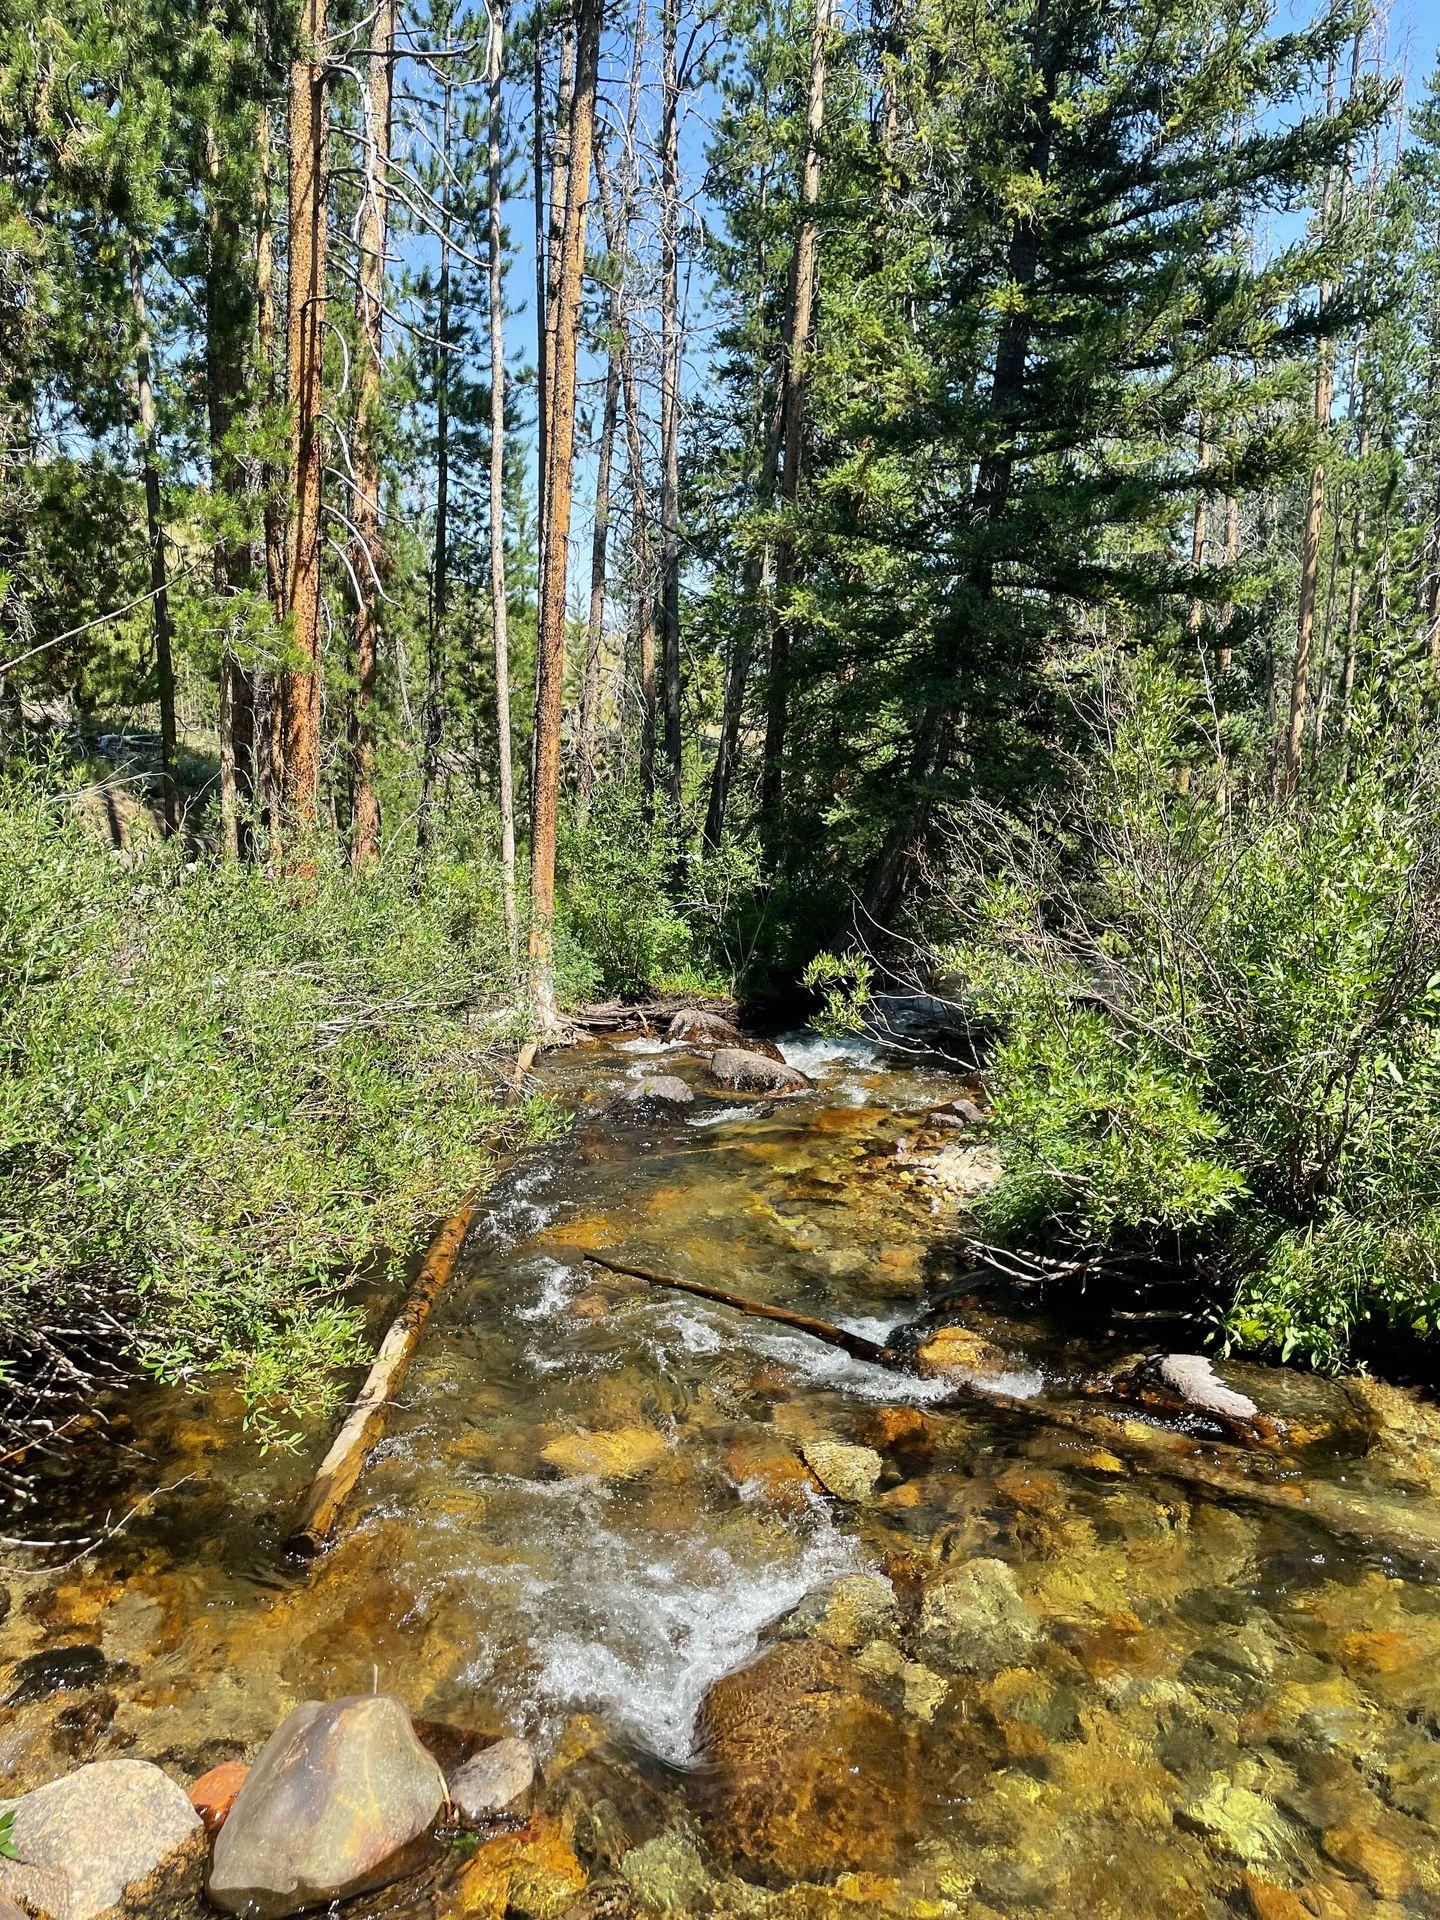 A creek surrounded by tall trees seen along the Fishhook Creek Trail.